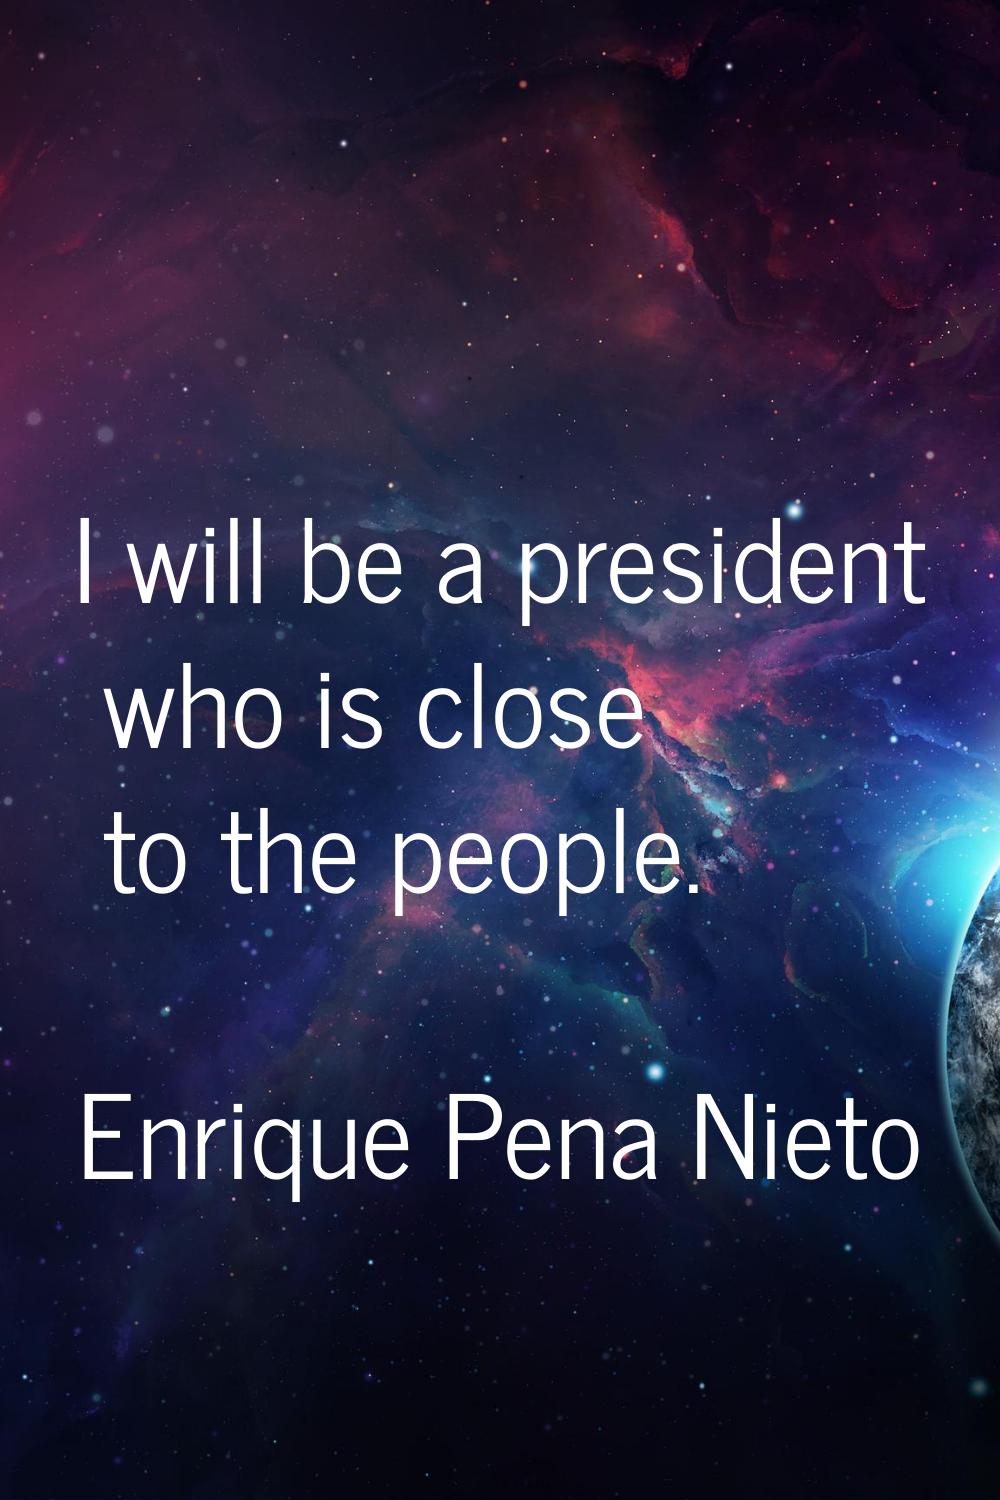 I will be a president who is close to the people.